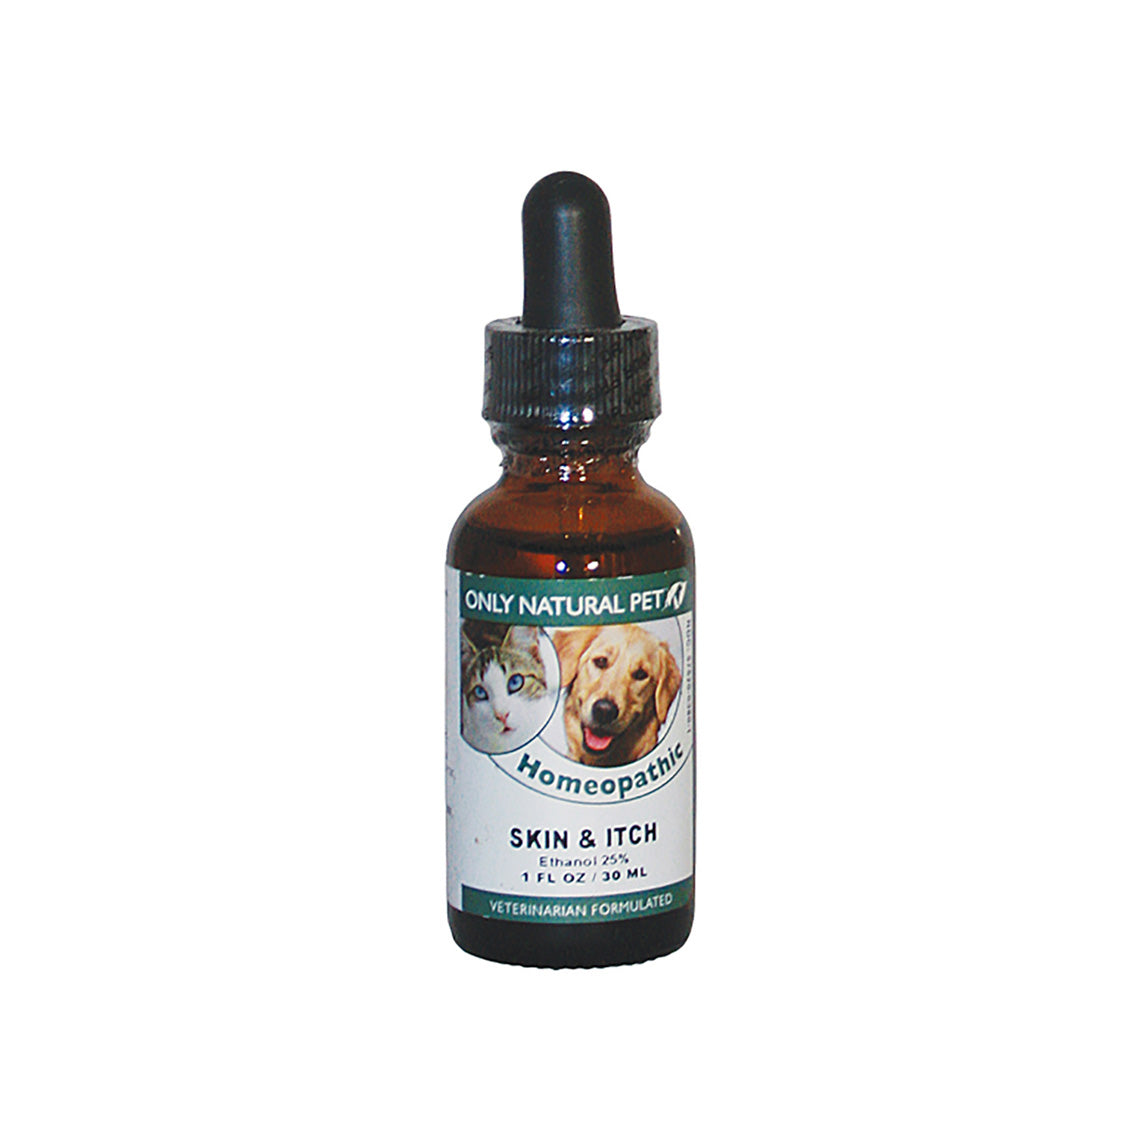 holistic allergy treatment for dogs